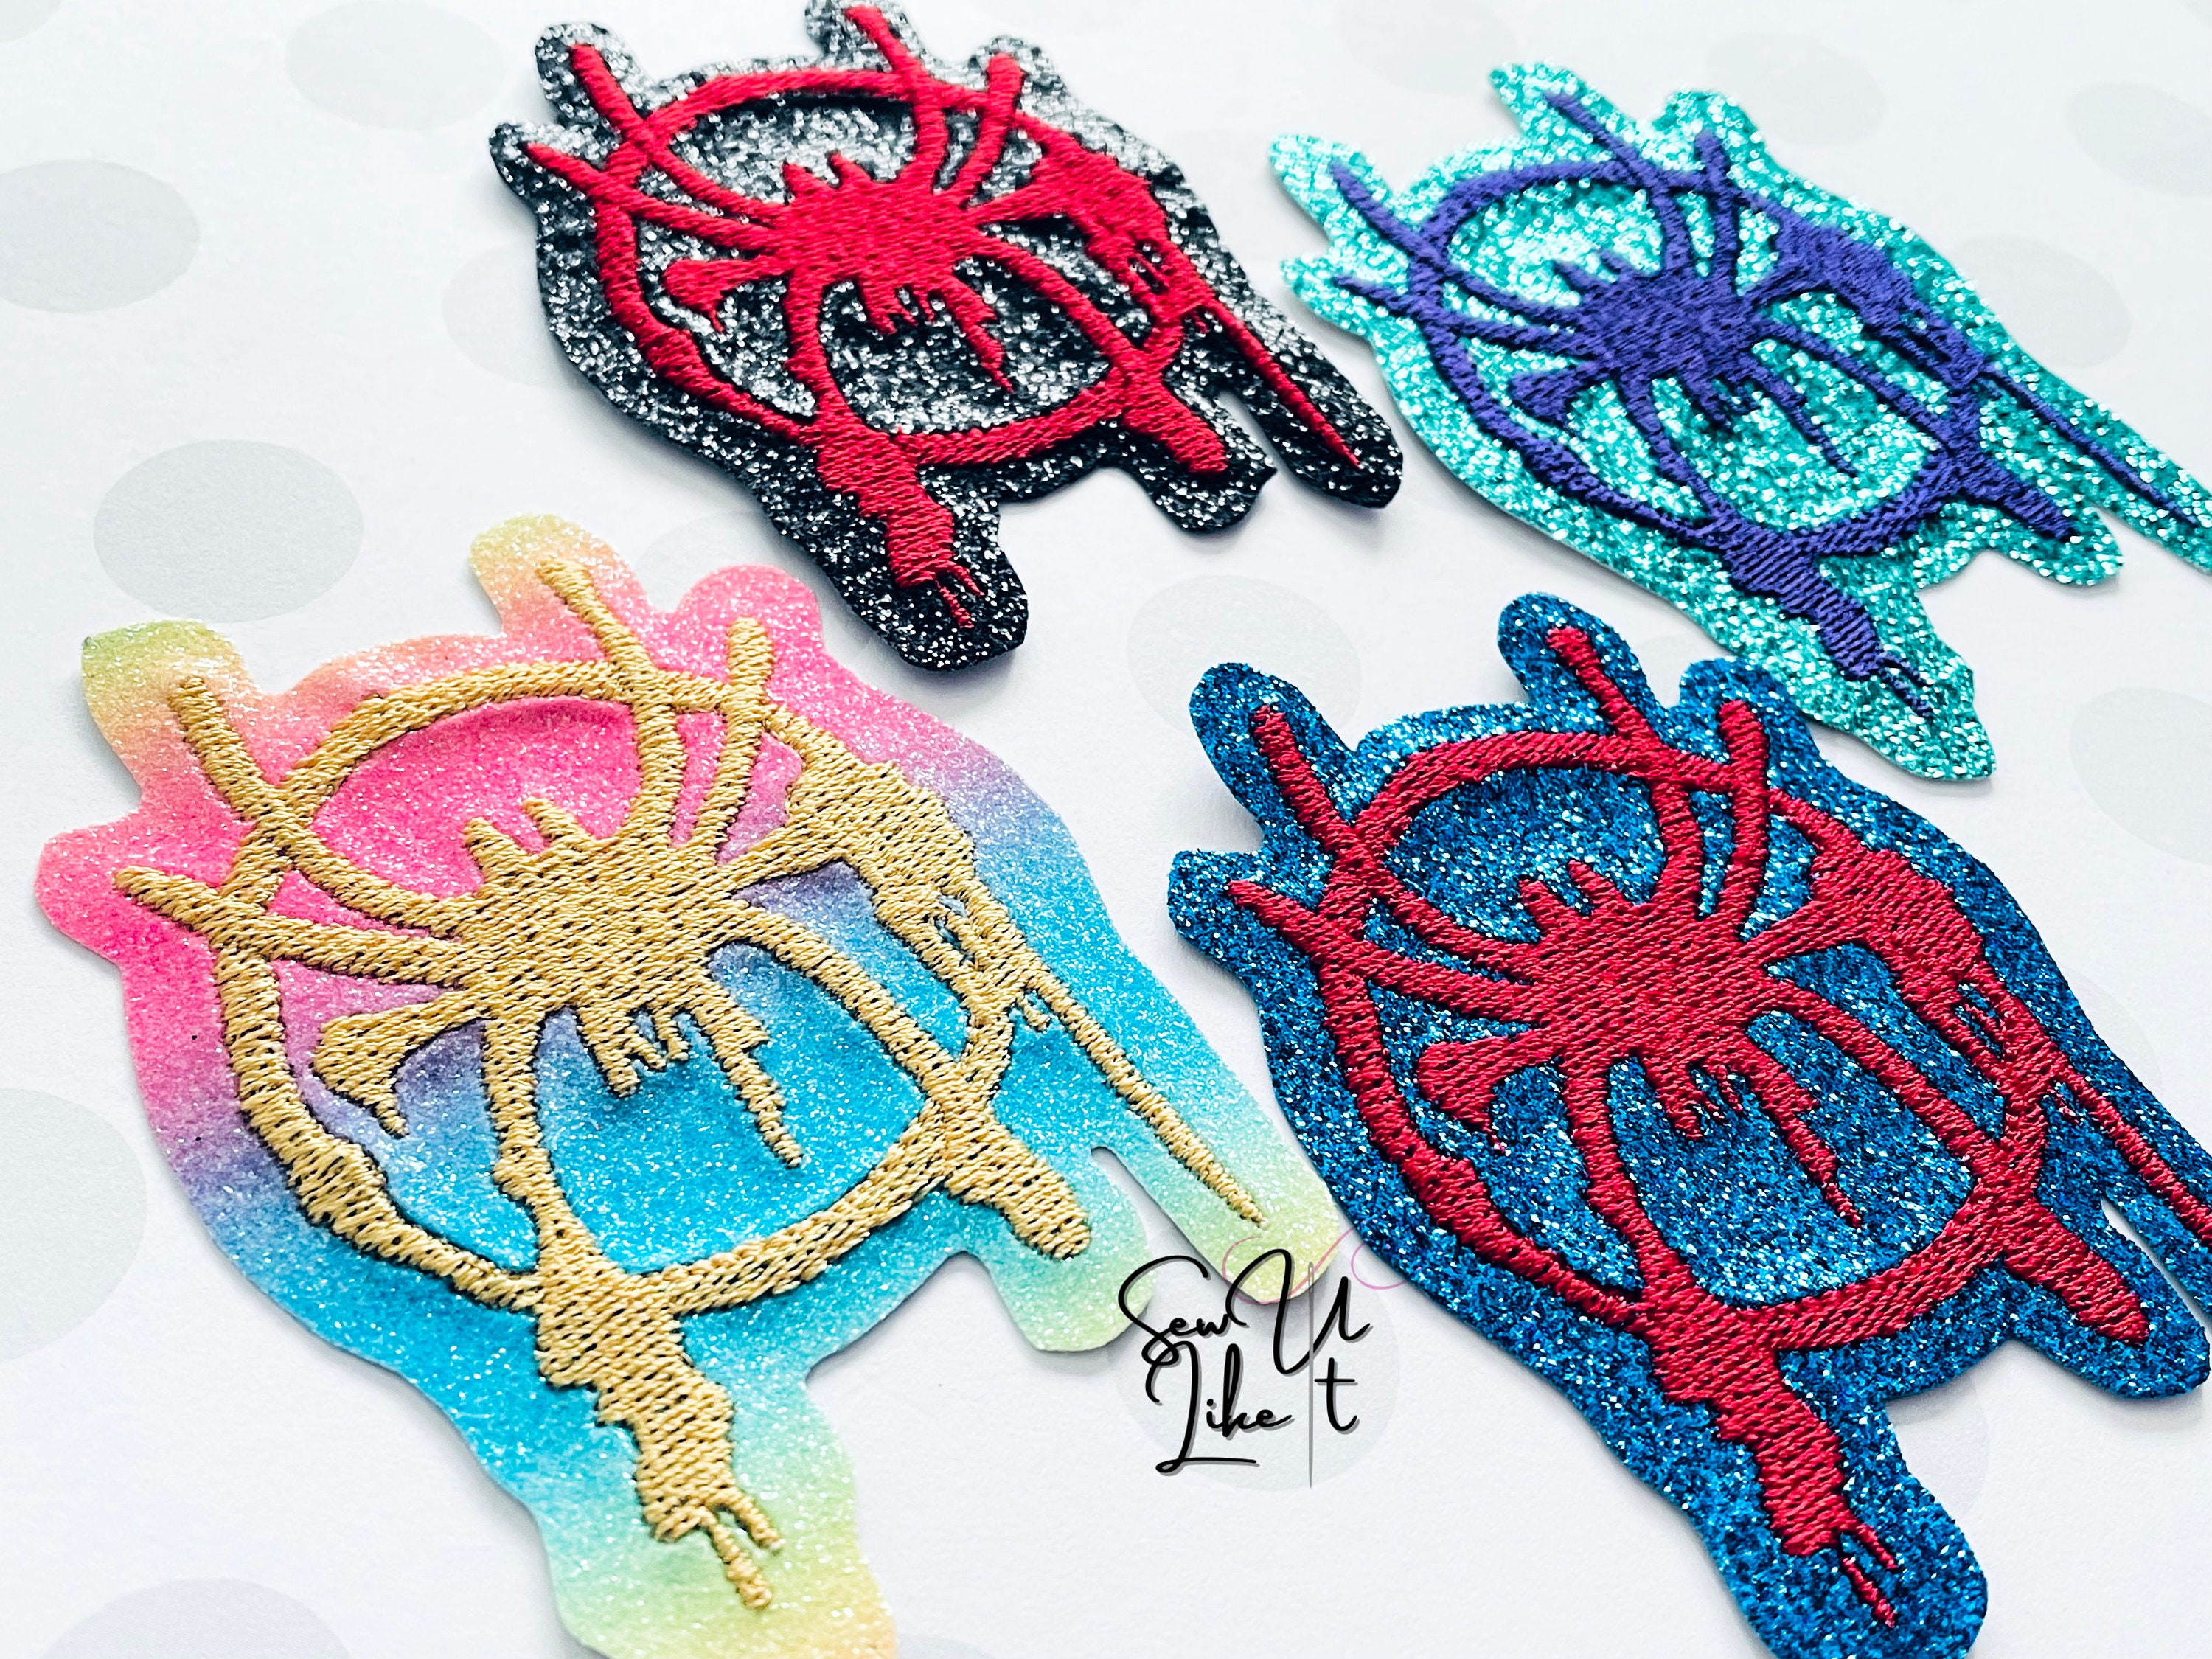 24 stk Spiderman Iron-on Patches, Brodery Iron-on Patch DIY Cl